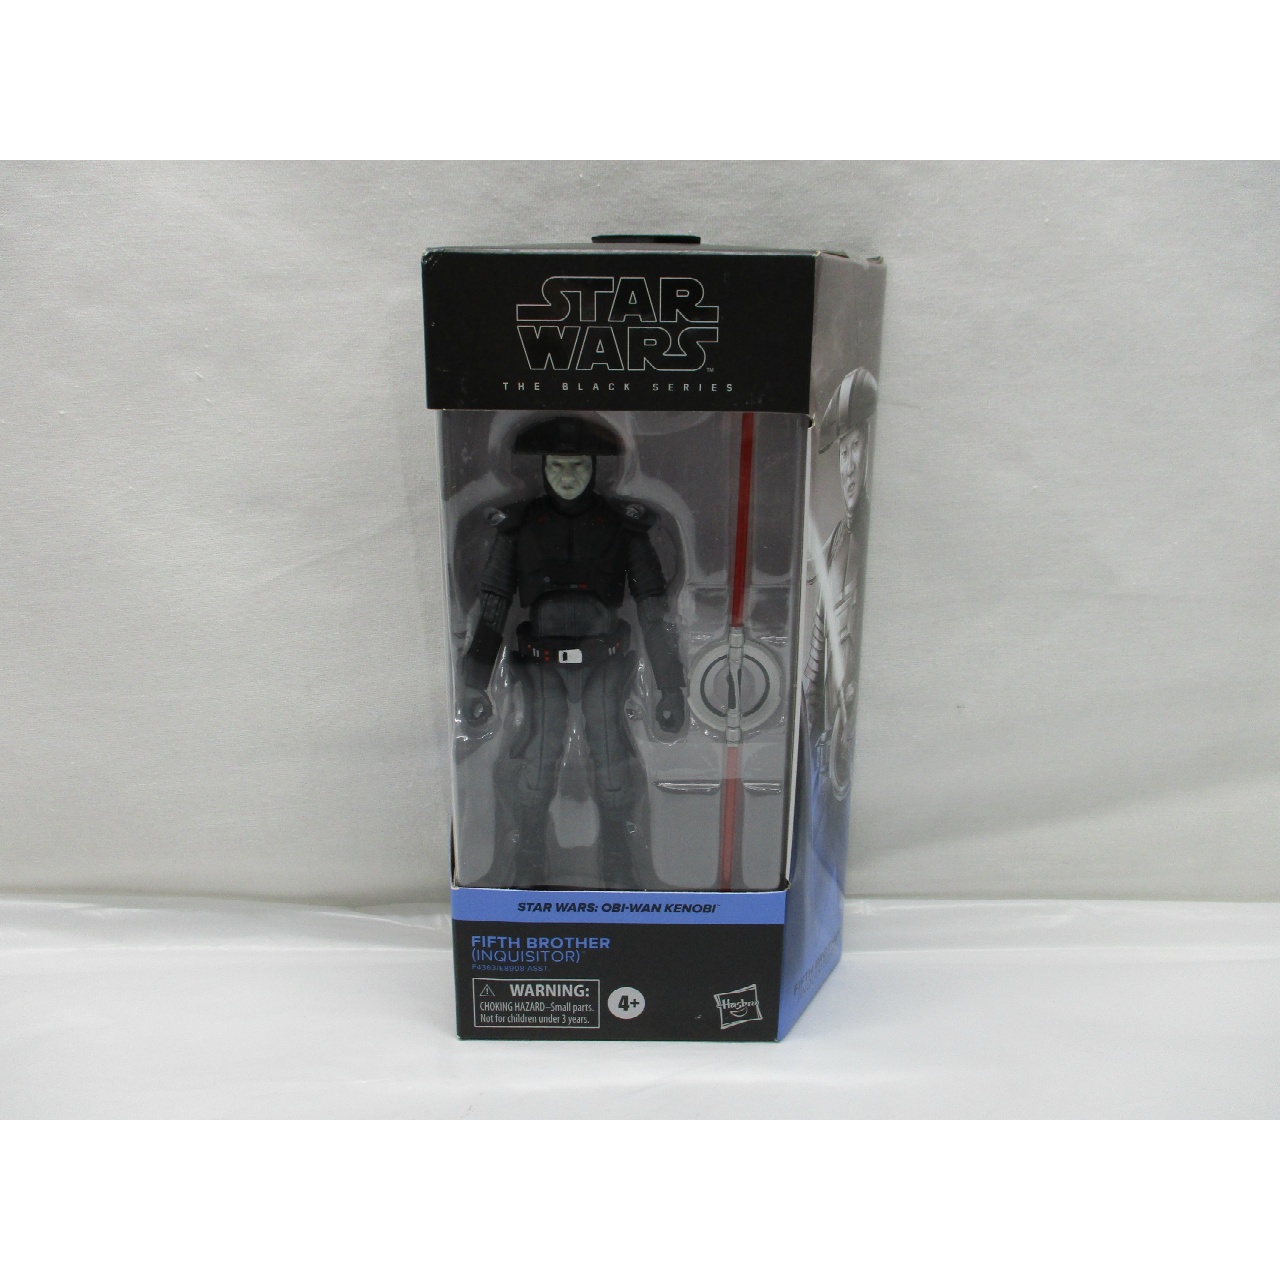 Hasbro STAR WARS Black Sriese Fifth Brother(Inquisitor) 6inchi Action Figure